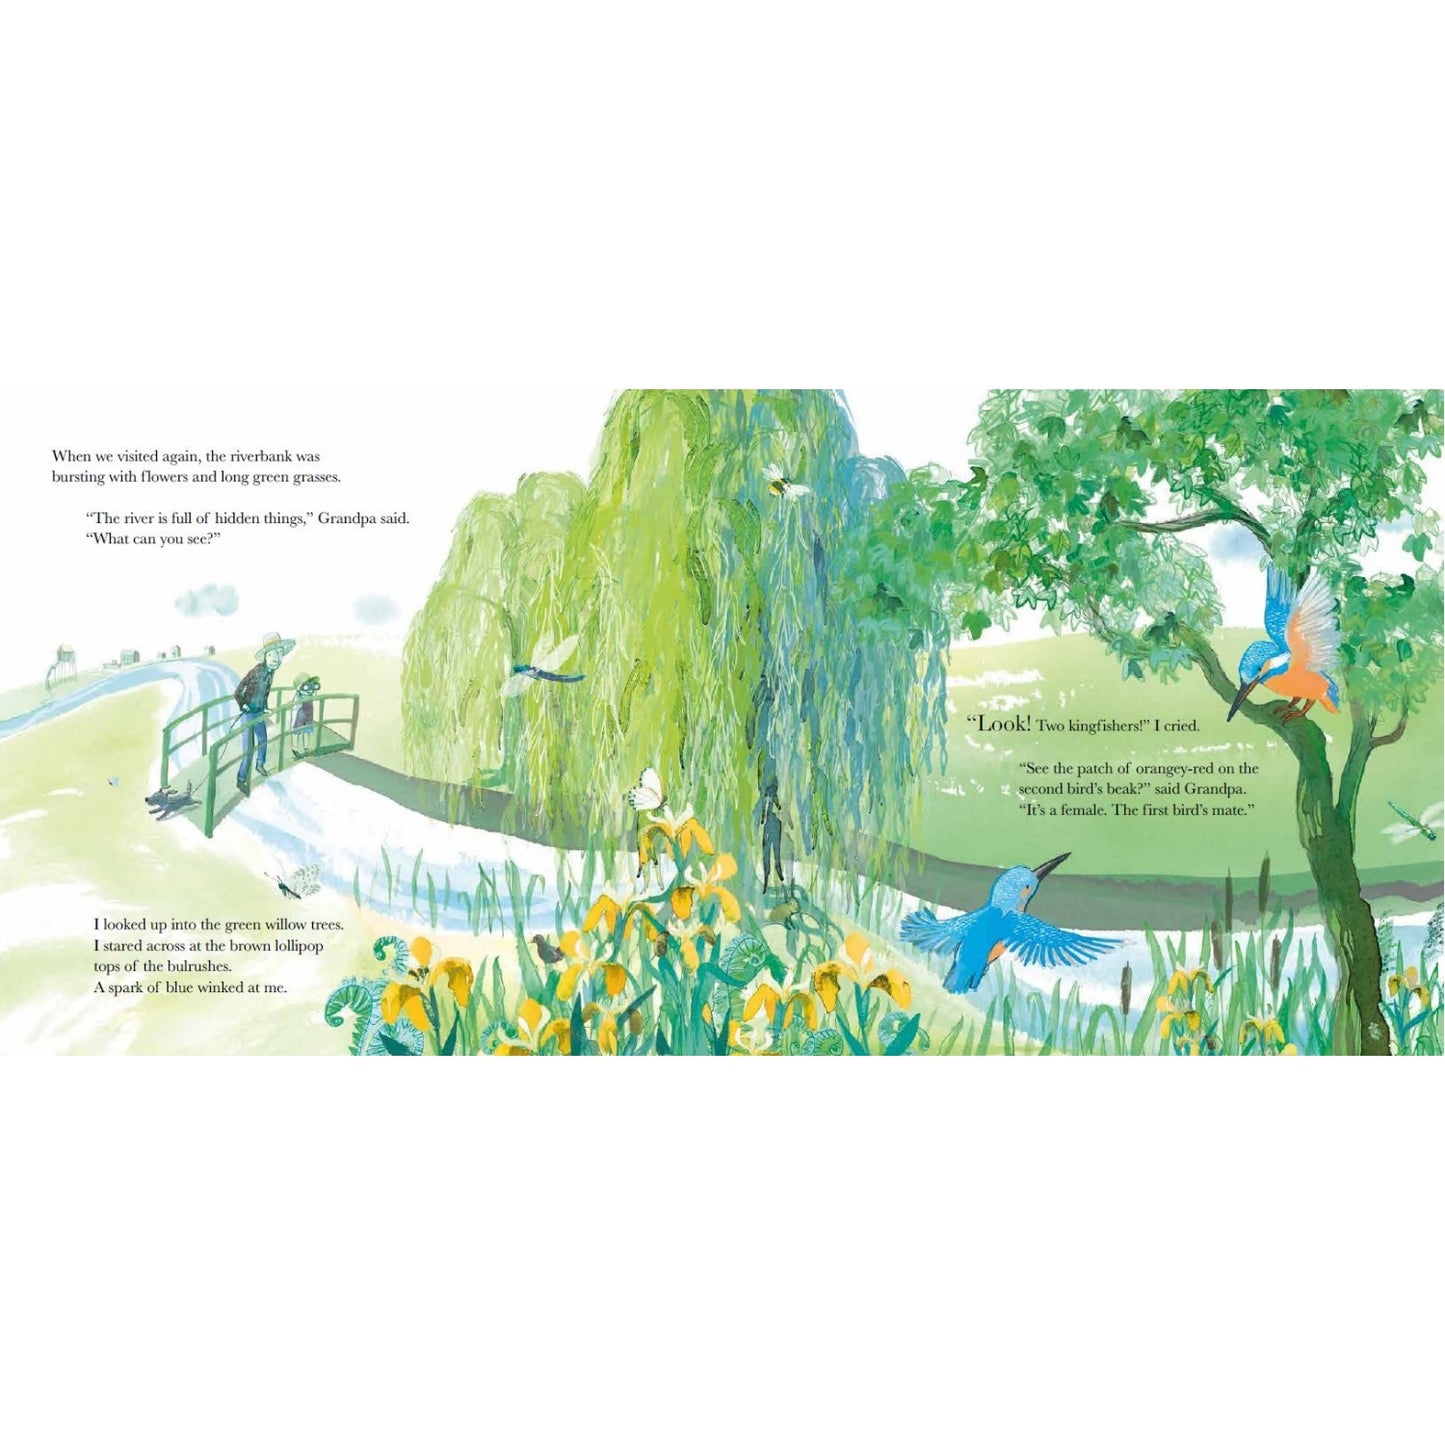 Grandpa and the Kingfisher | Children’s Book on Family Life